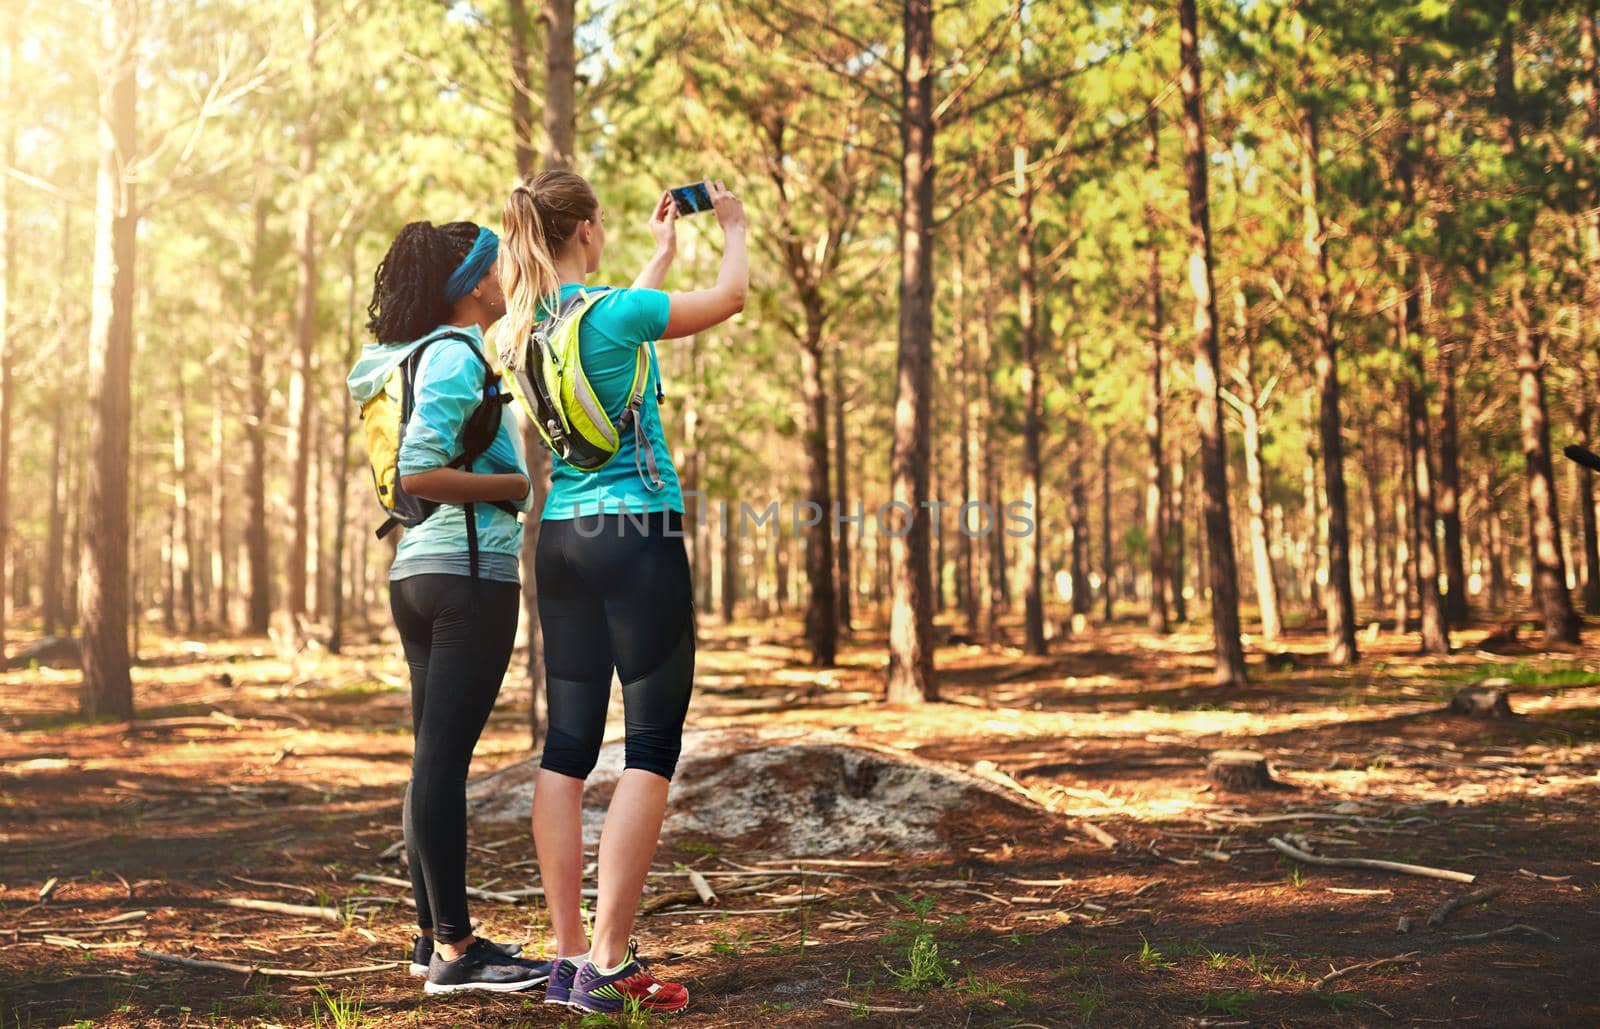 Take nothing but memories with you. two sporty young woman taking pictures while out in nature